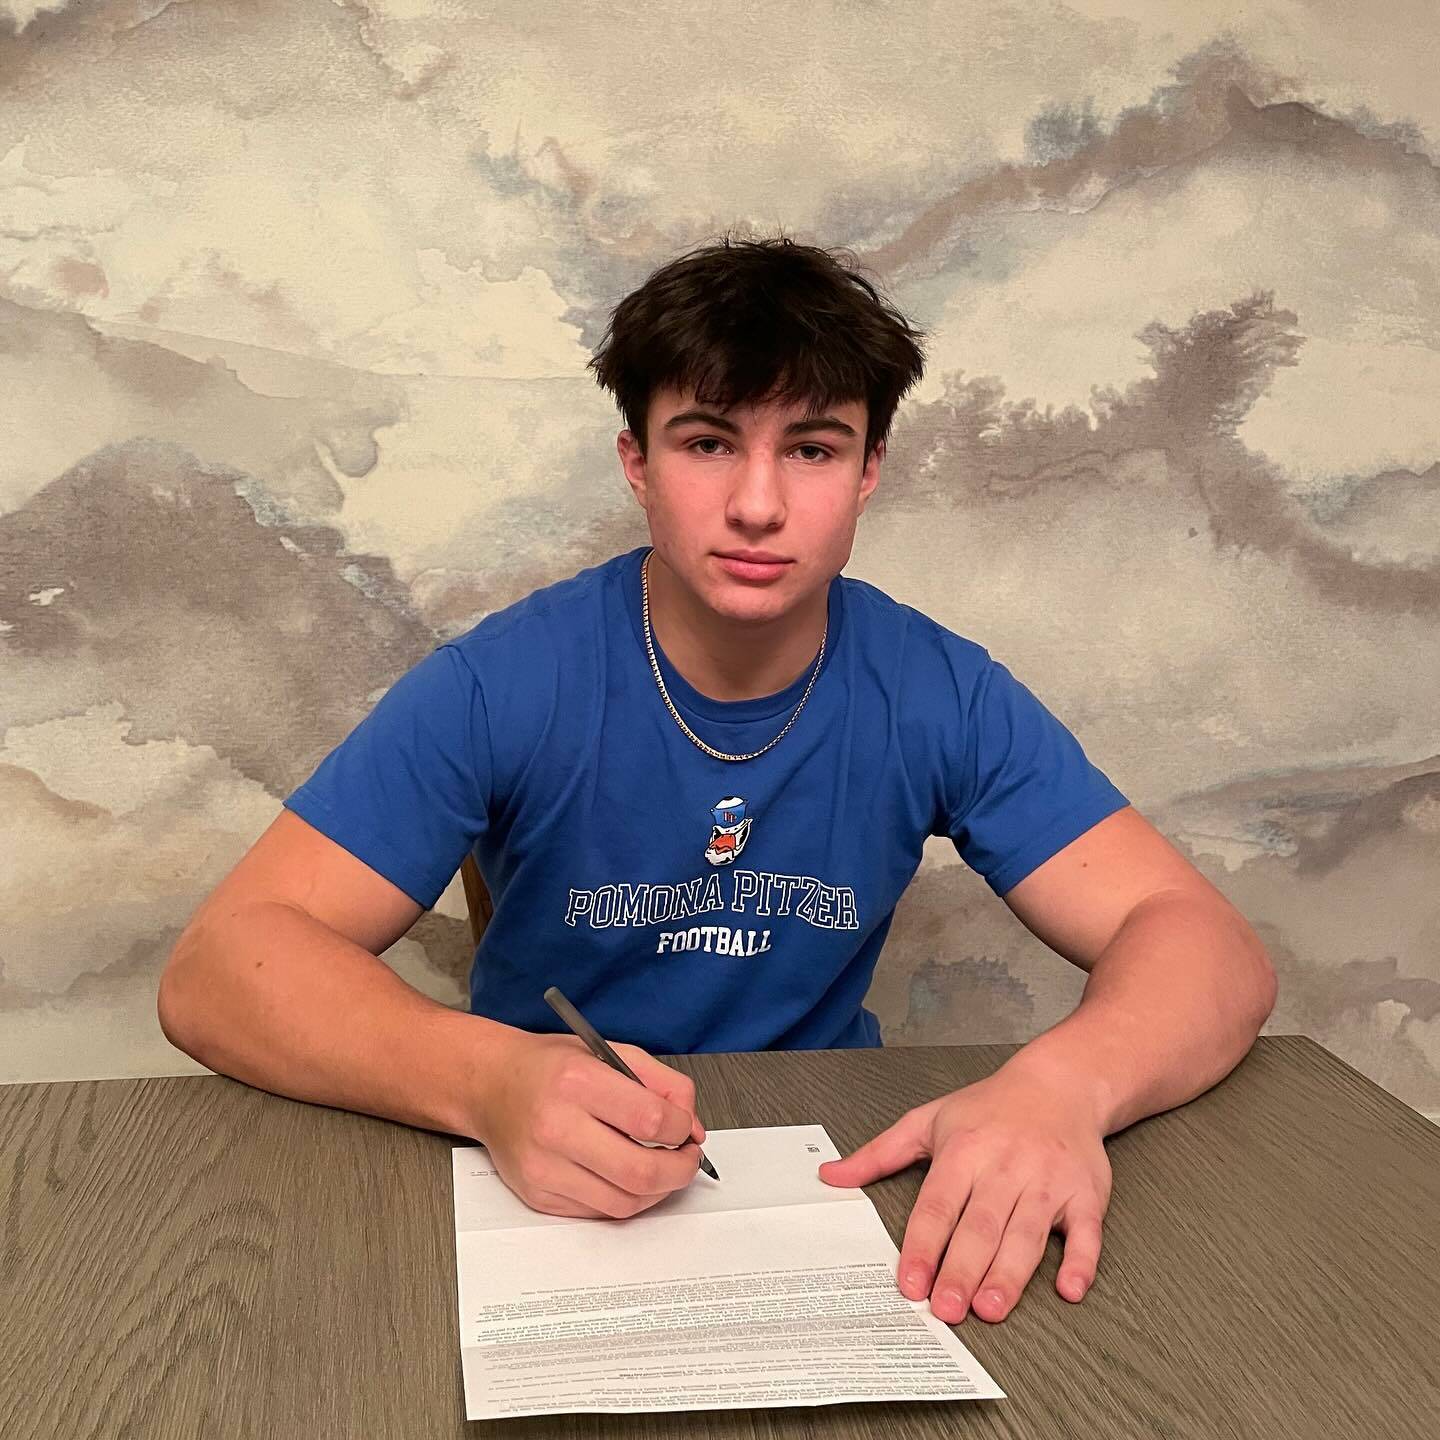 Mercer Island High School senior football player Cole Krawiec signed a national letter of intent to play next season for the Pomona Pitzer colleges squad in Claremont, California. Krawiec was a first-team 3A All-KingCo running back this season. Photo courtesy of the Mercer Island School District